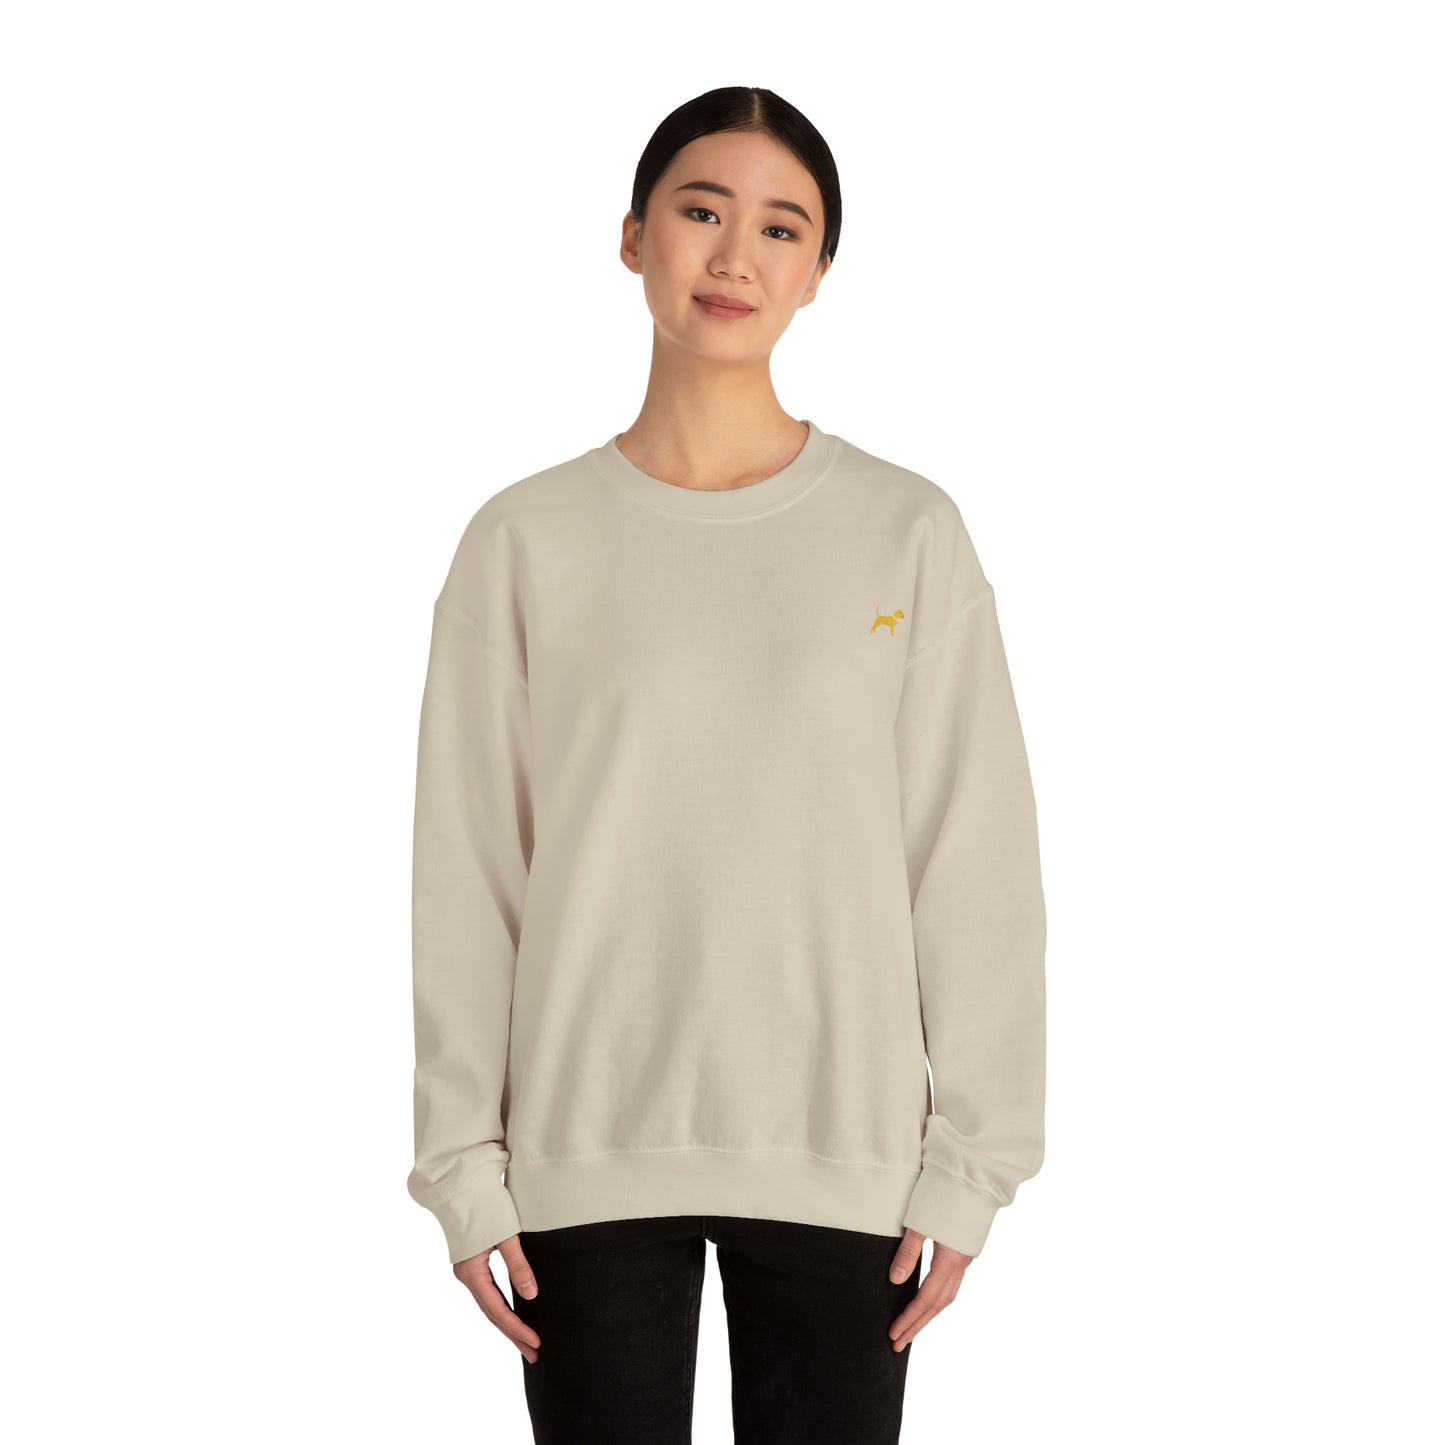 Unleashed Life Little Yellow Dog Crewneck with Script